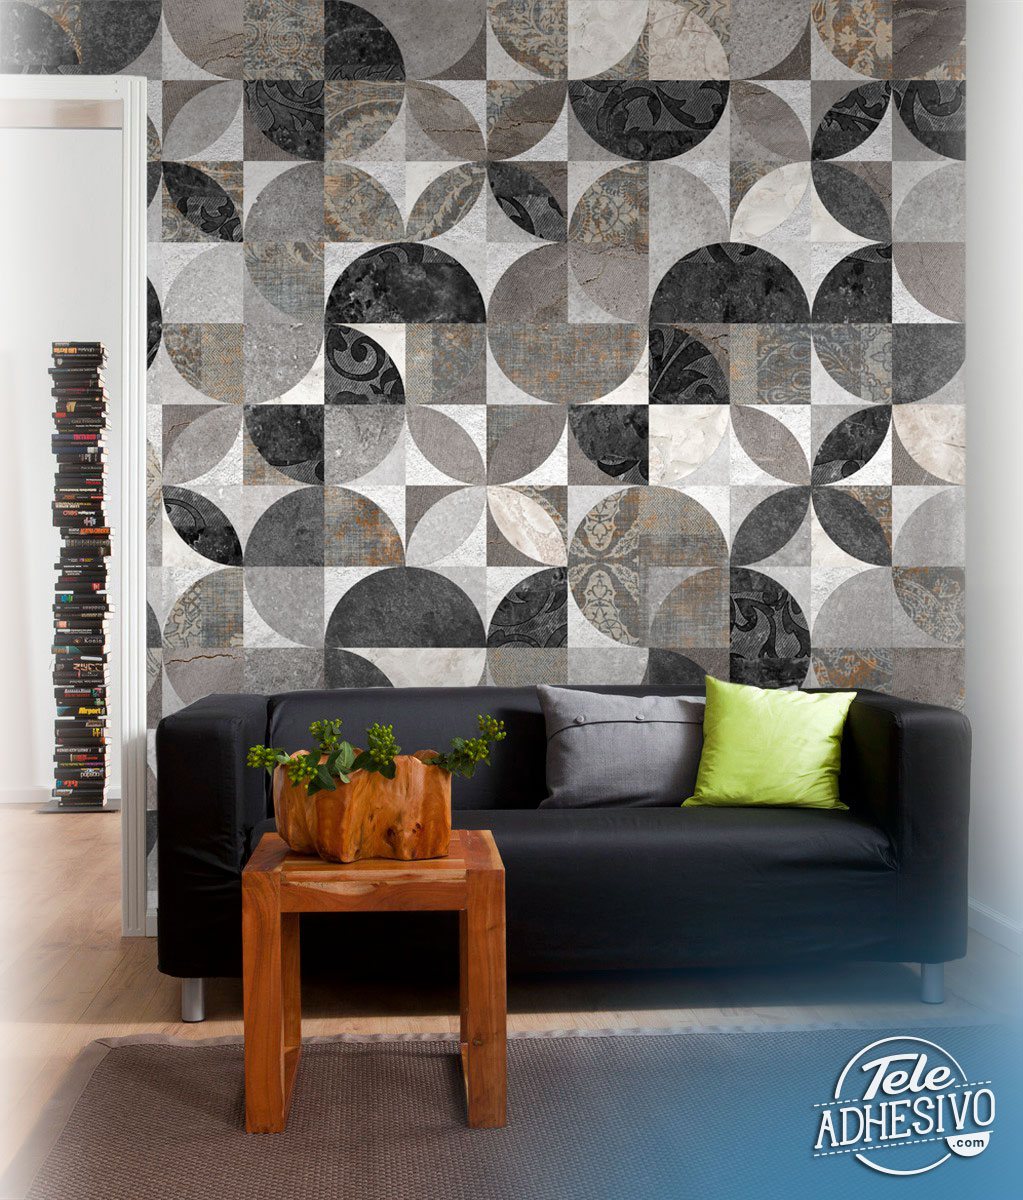 Wall Murals: Symmetry with circles